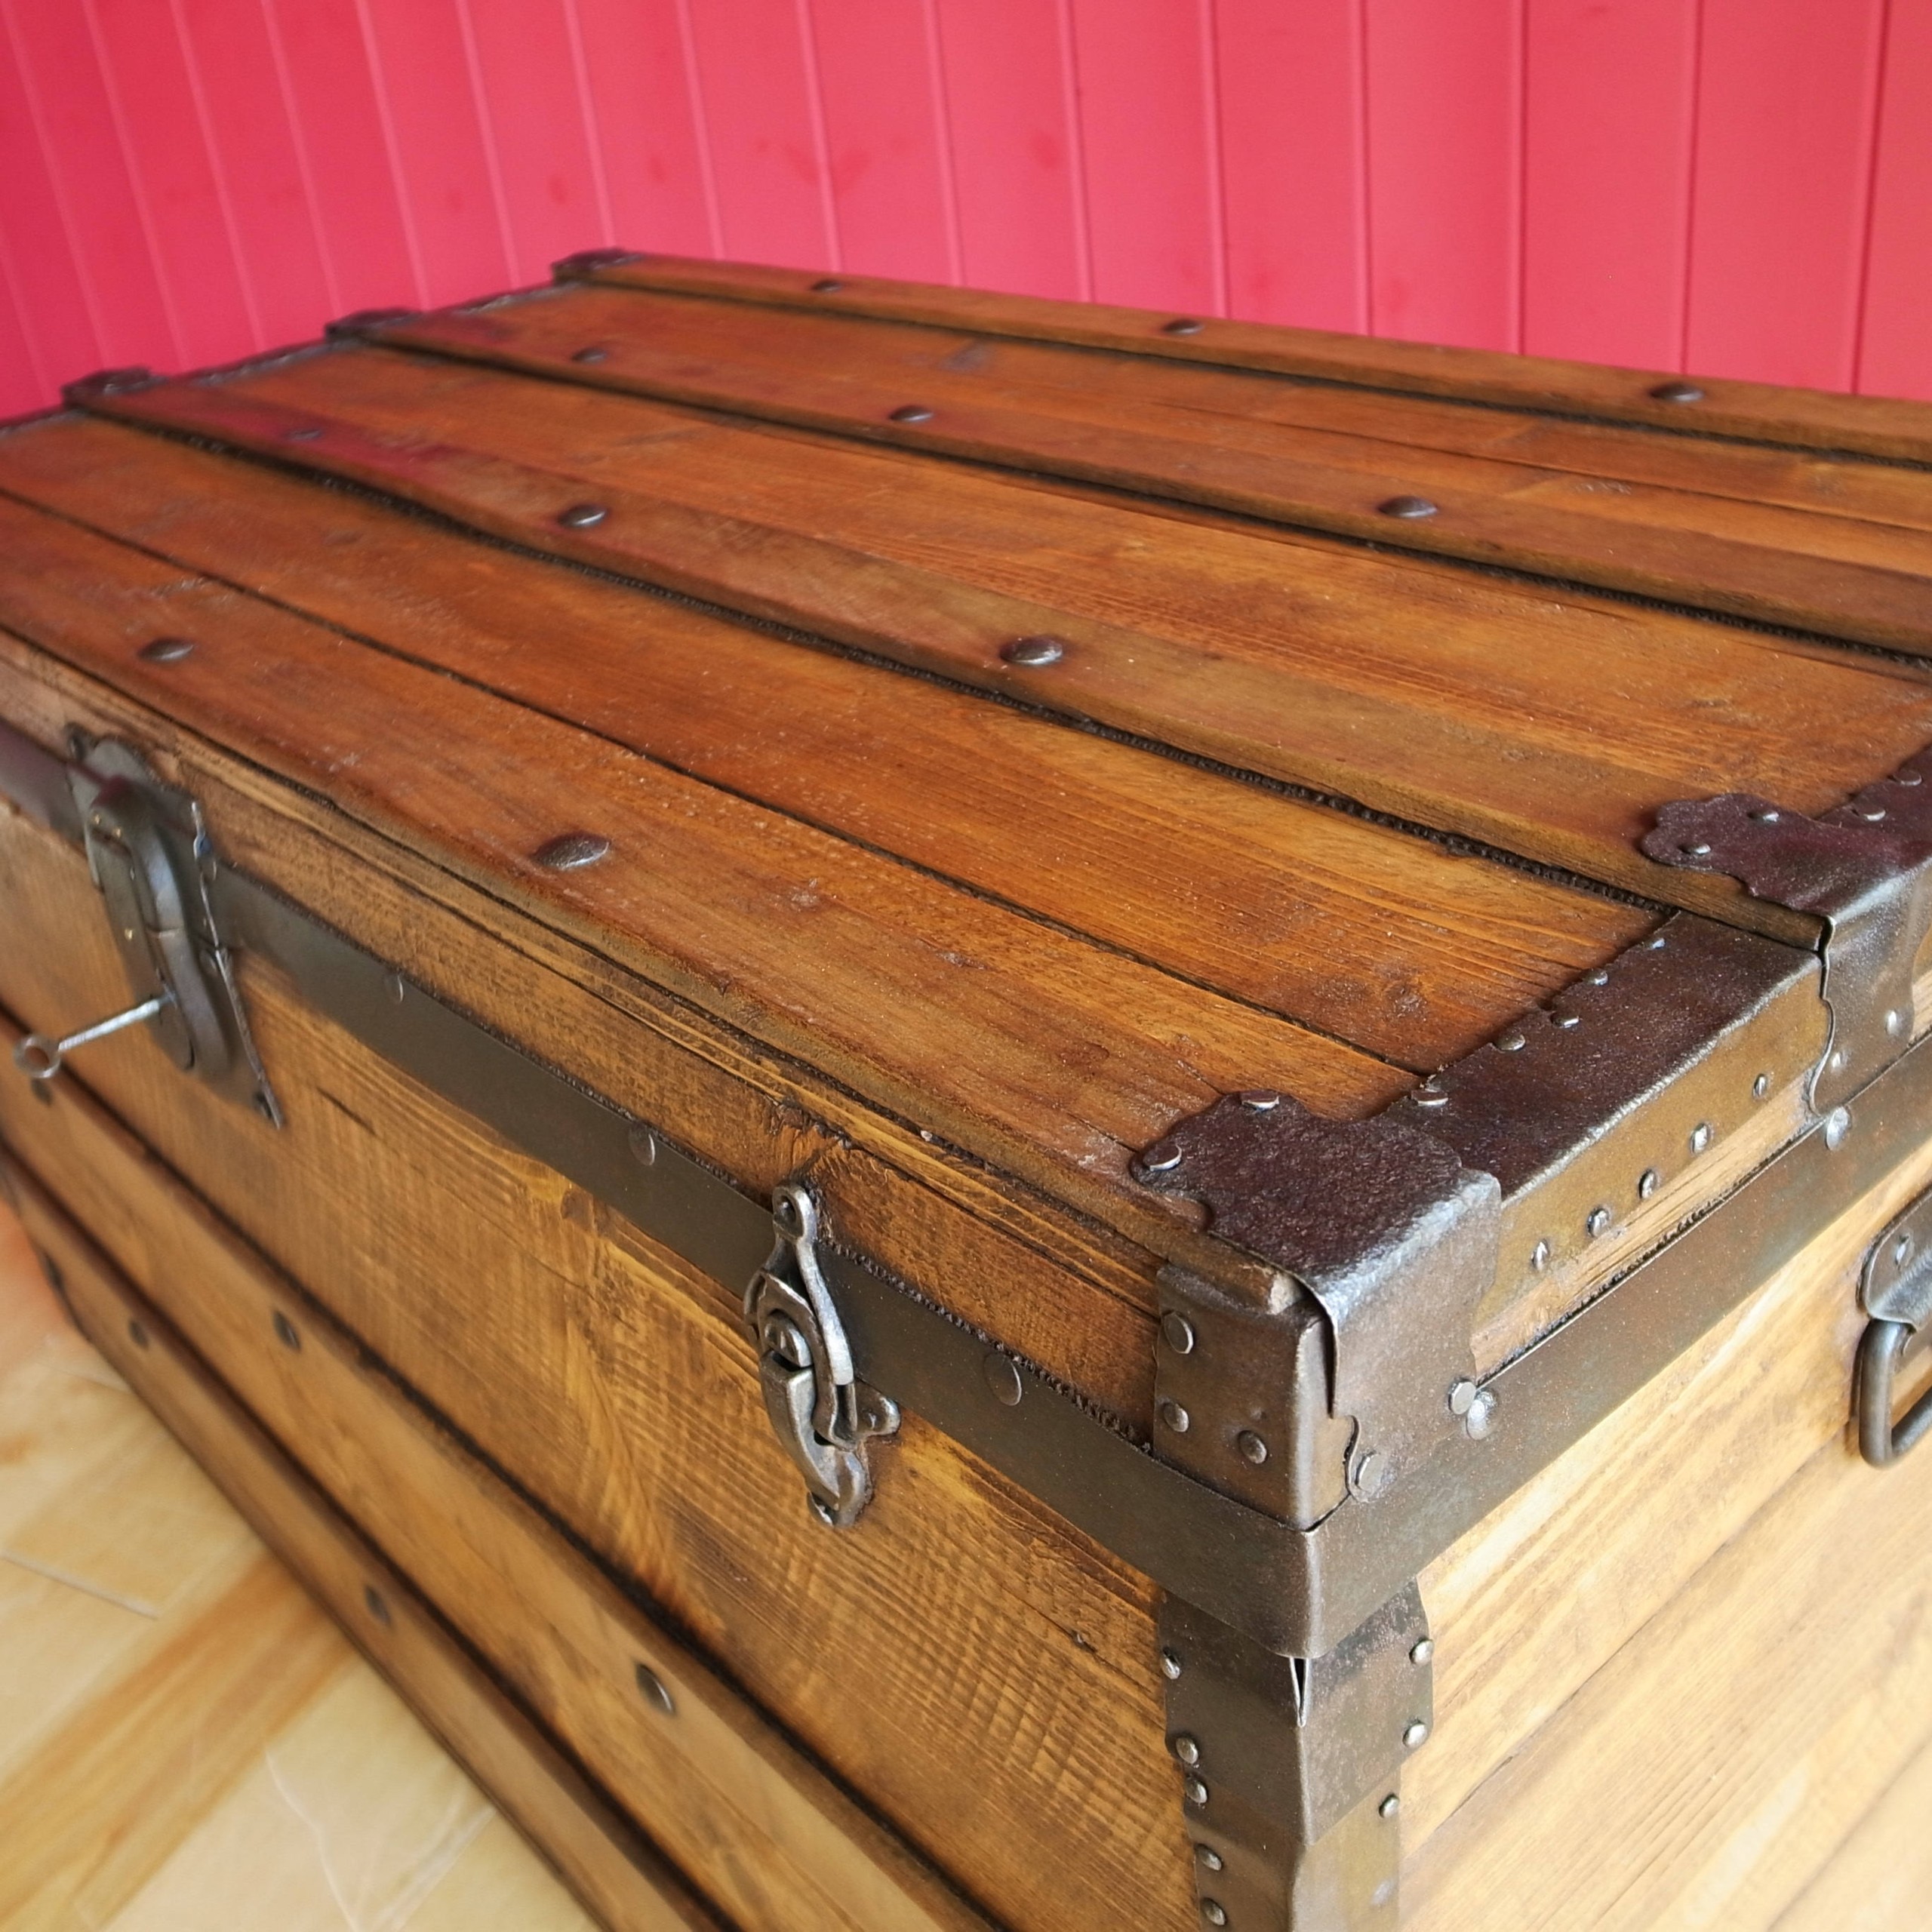 Vintage steamer trunk coffee table storage chest old